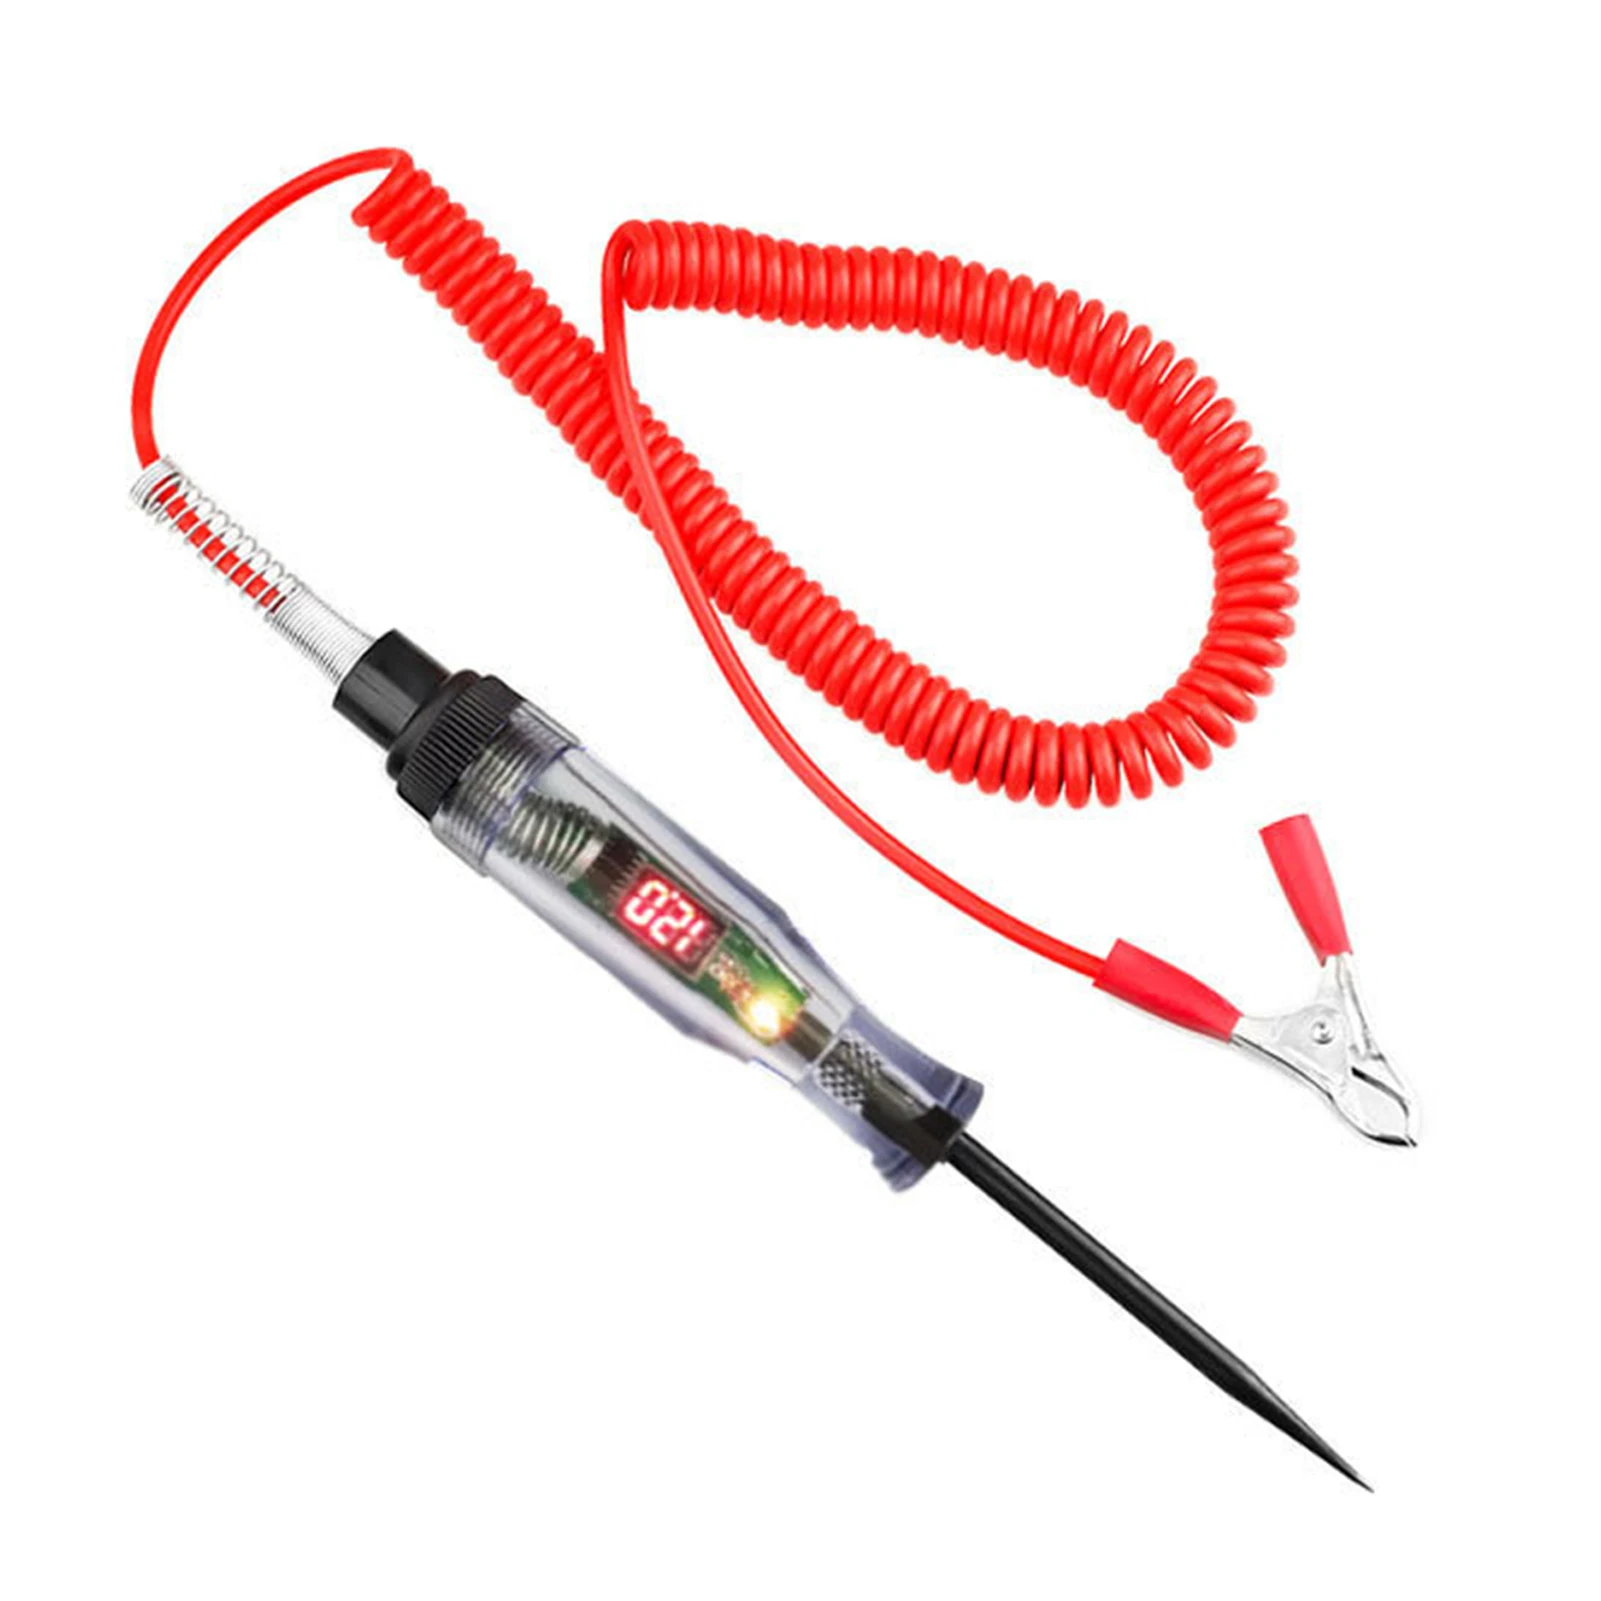 

3V To 70V Automotive Circuit Tester Auto Voltage Detector Pen With Digital Display Electric Tester Pen With Sharp Piercing Probe